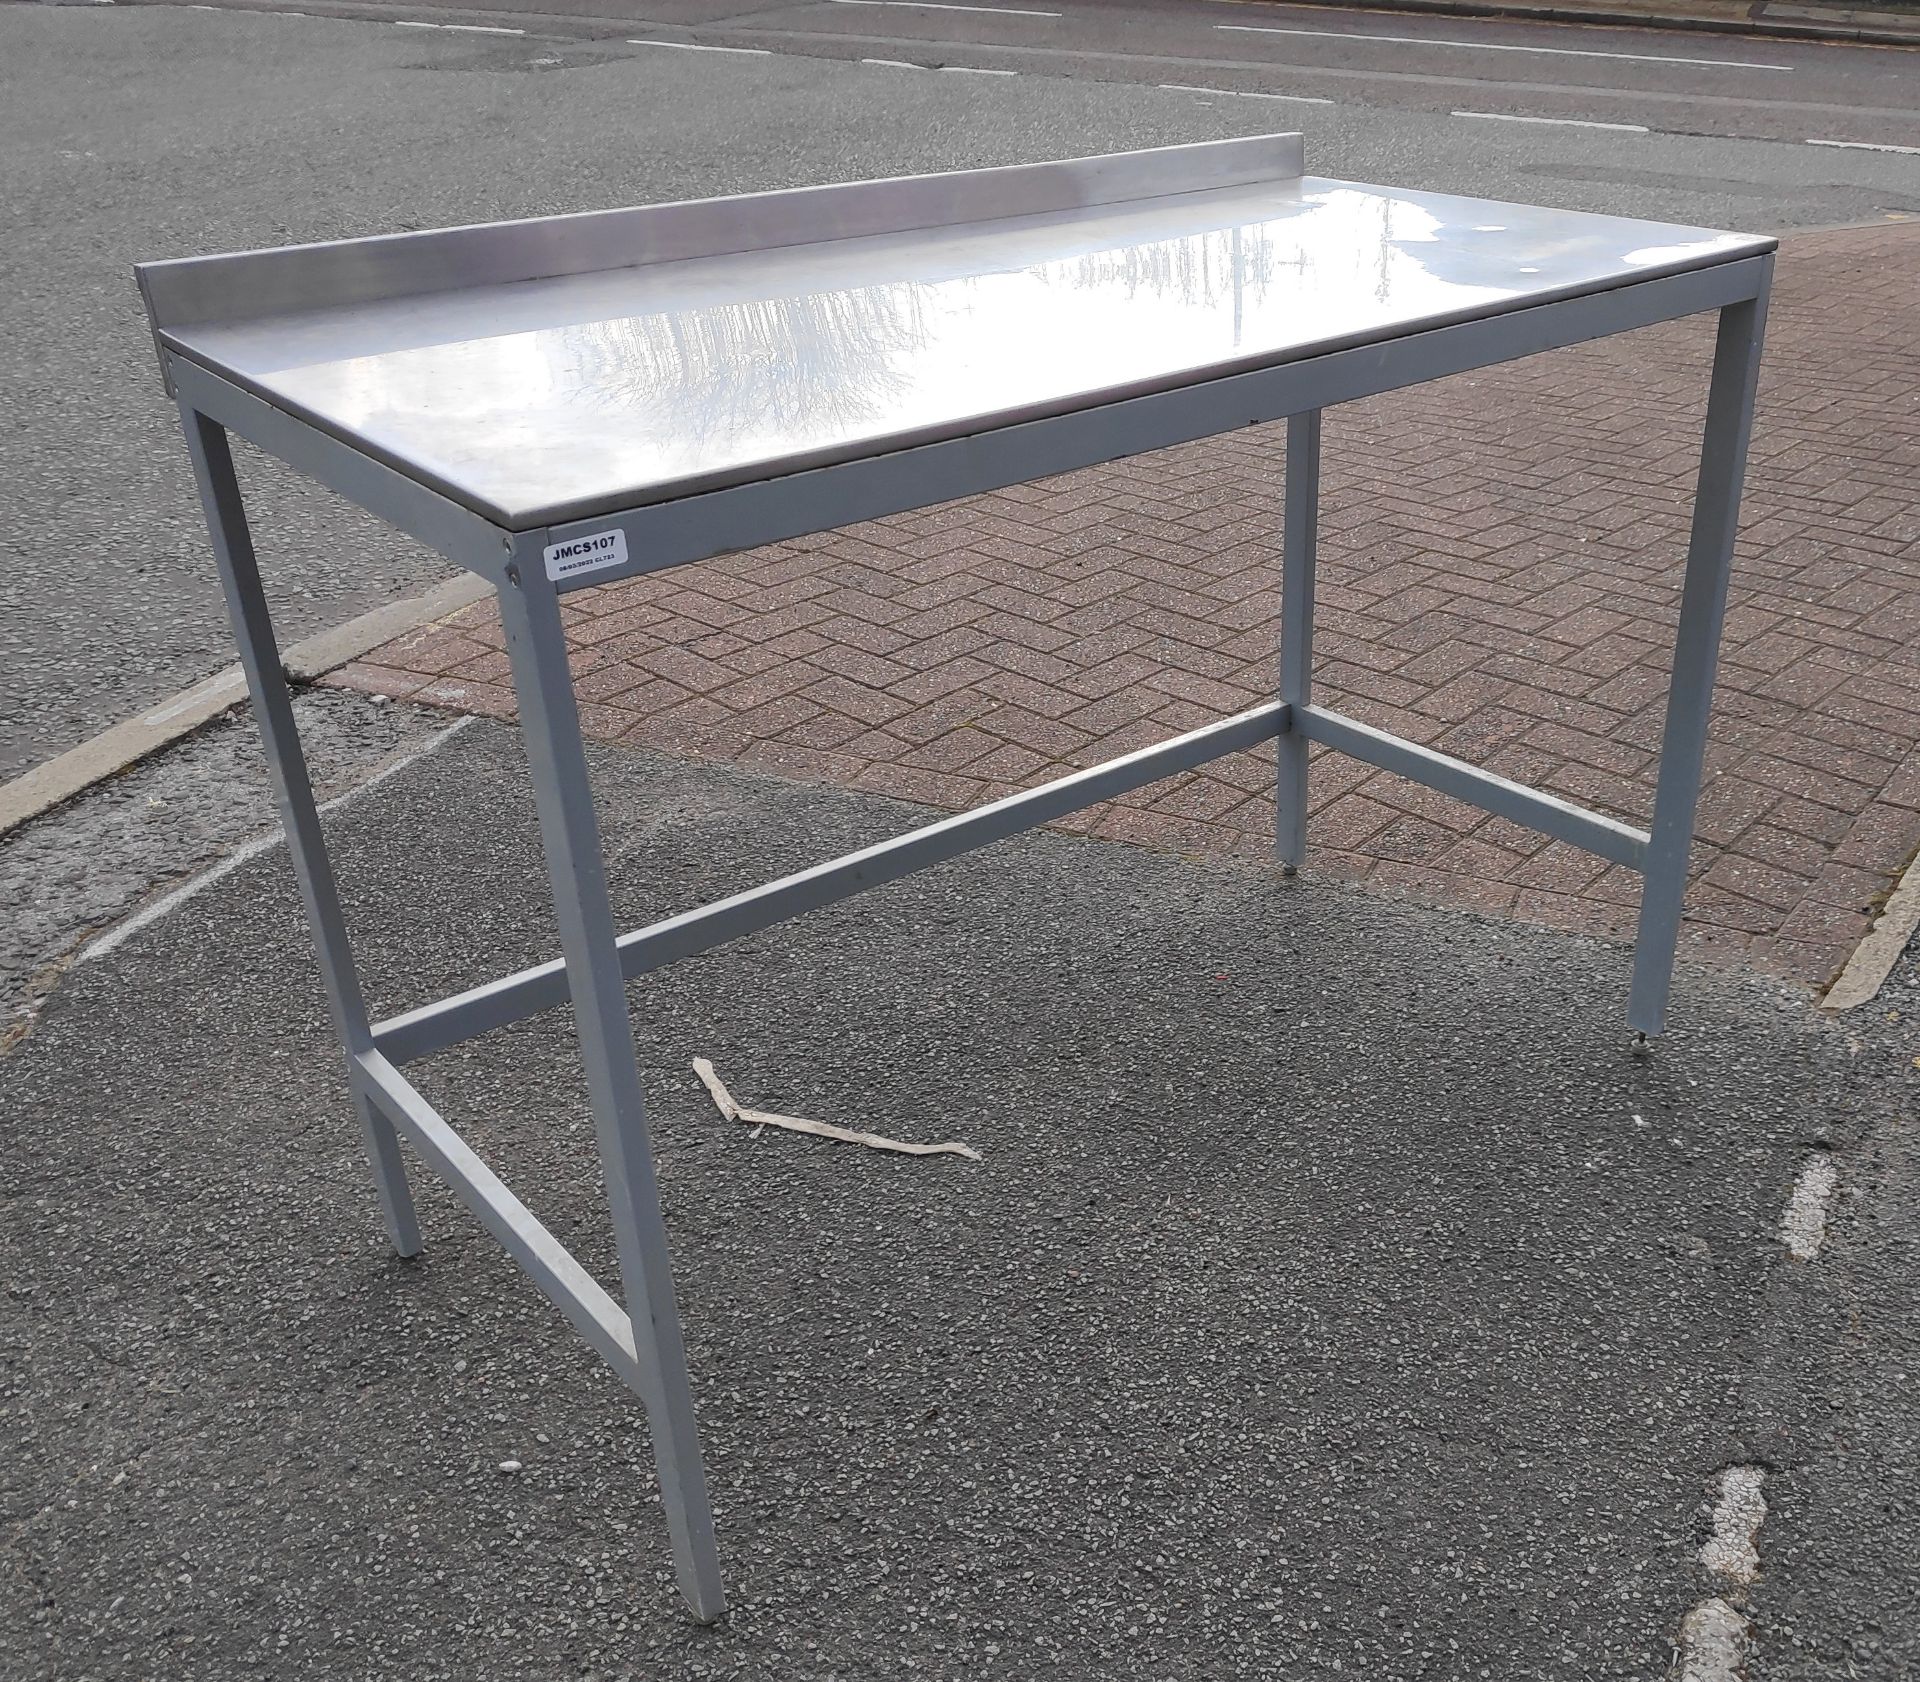 1 x Stainless Steel Prep Bench with Upstand - 126cm (L) x 64.5cm (D) x 95cm (H) - JMCS107 - CL723 - - Image 7 of 7